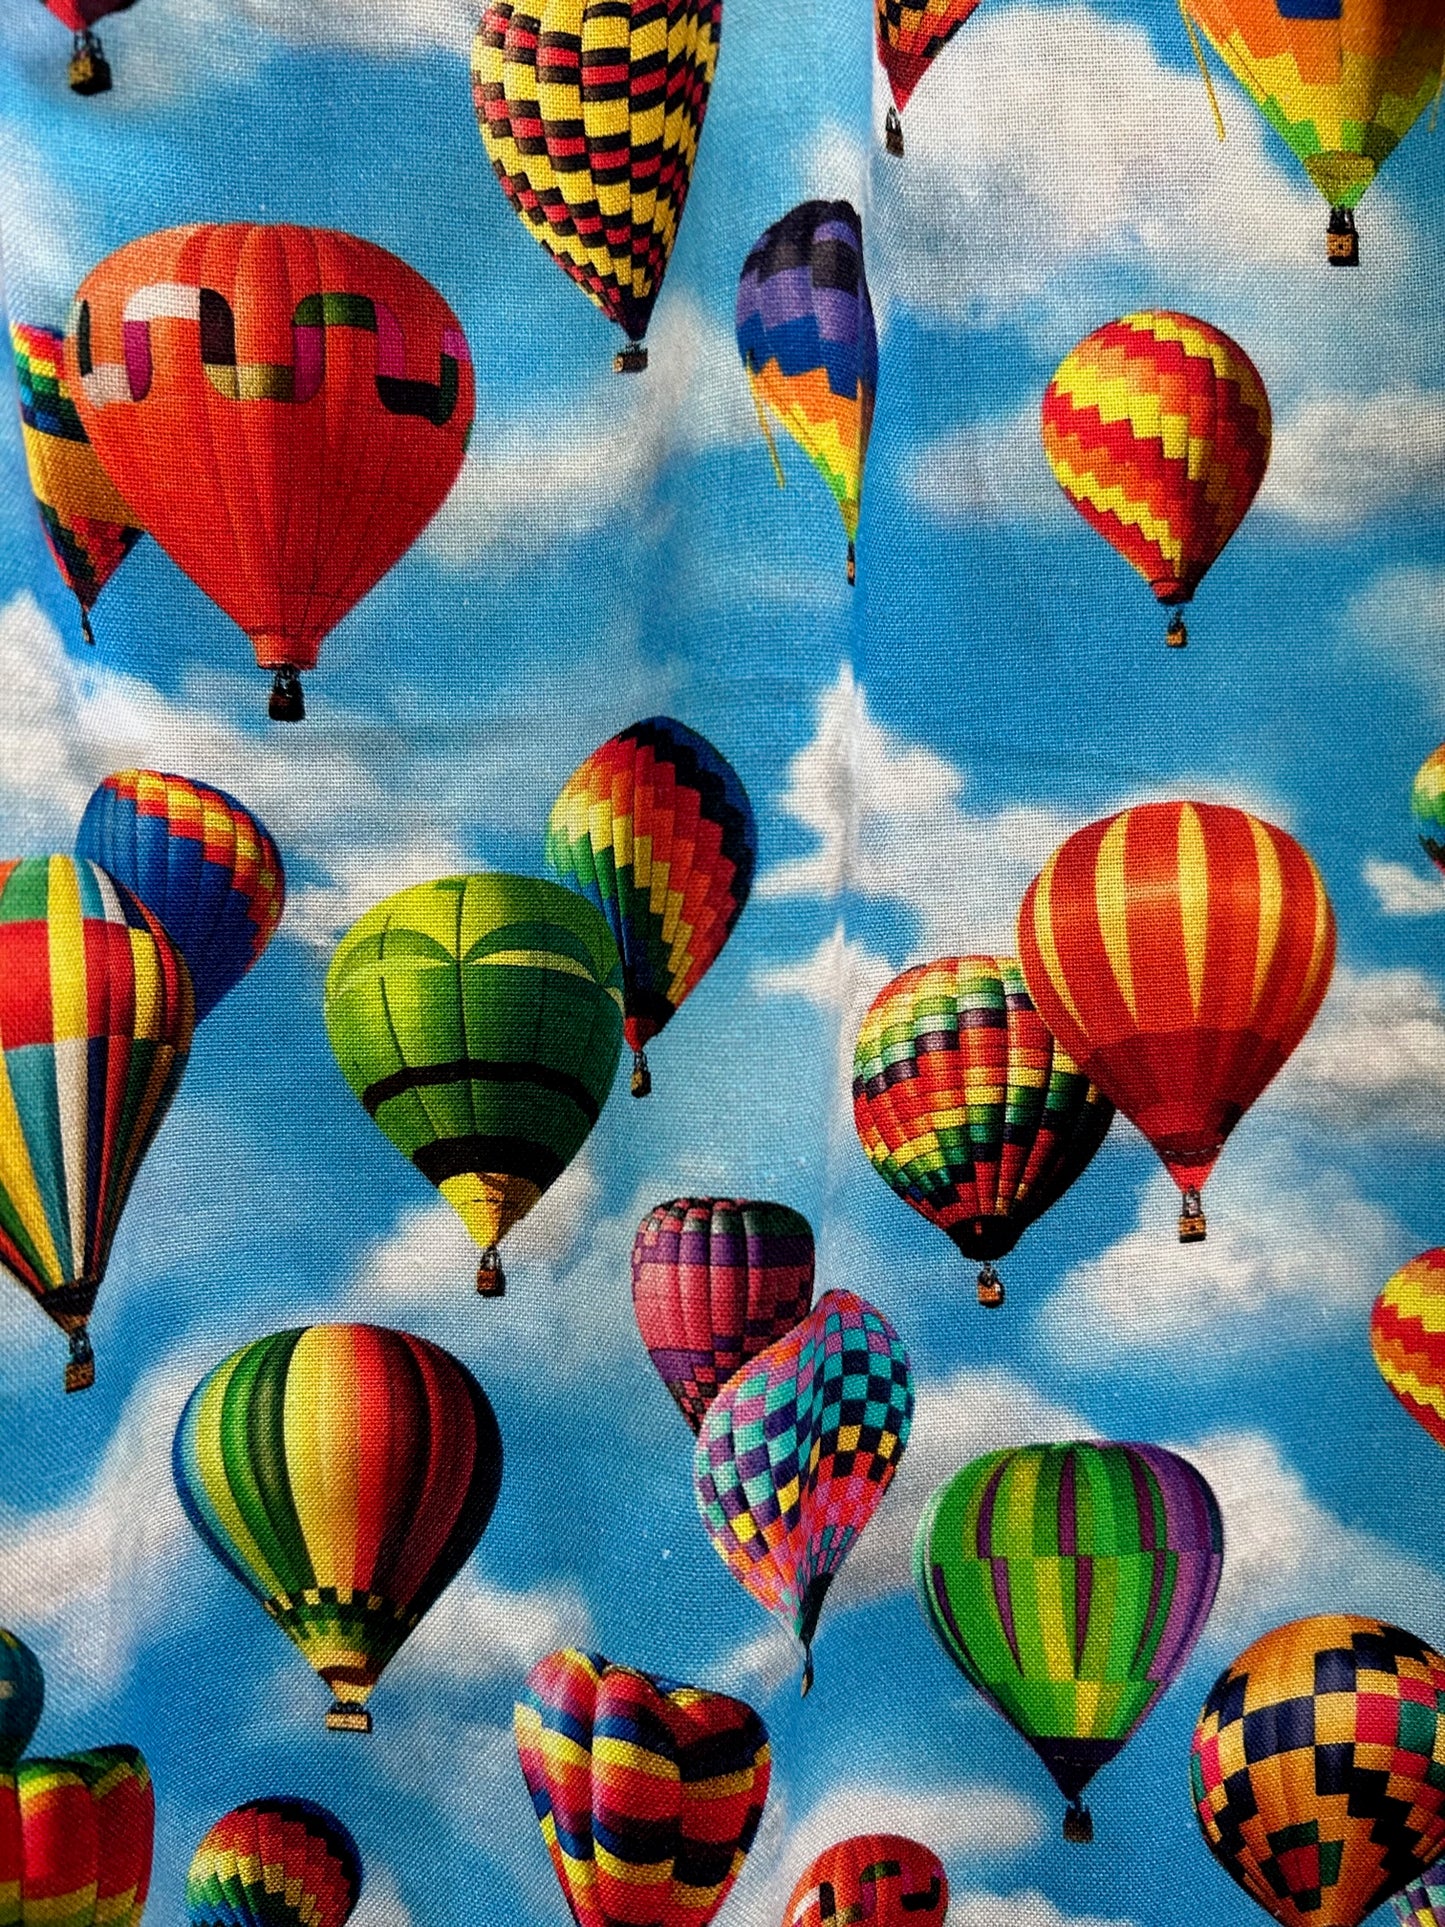 a close up of the fabric showing colorful hot air balloons on a background on blue skies and white clouds